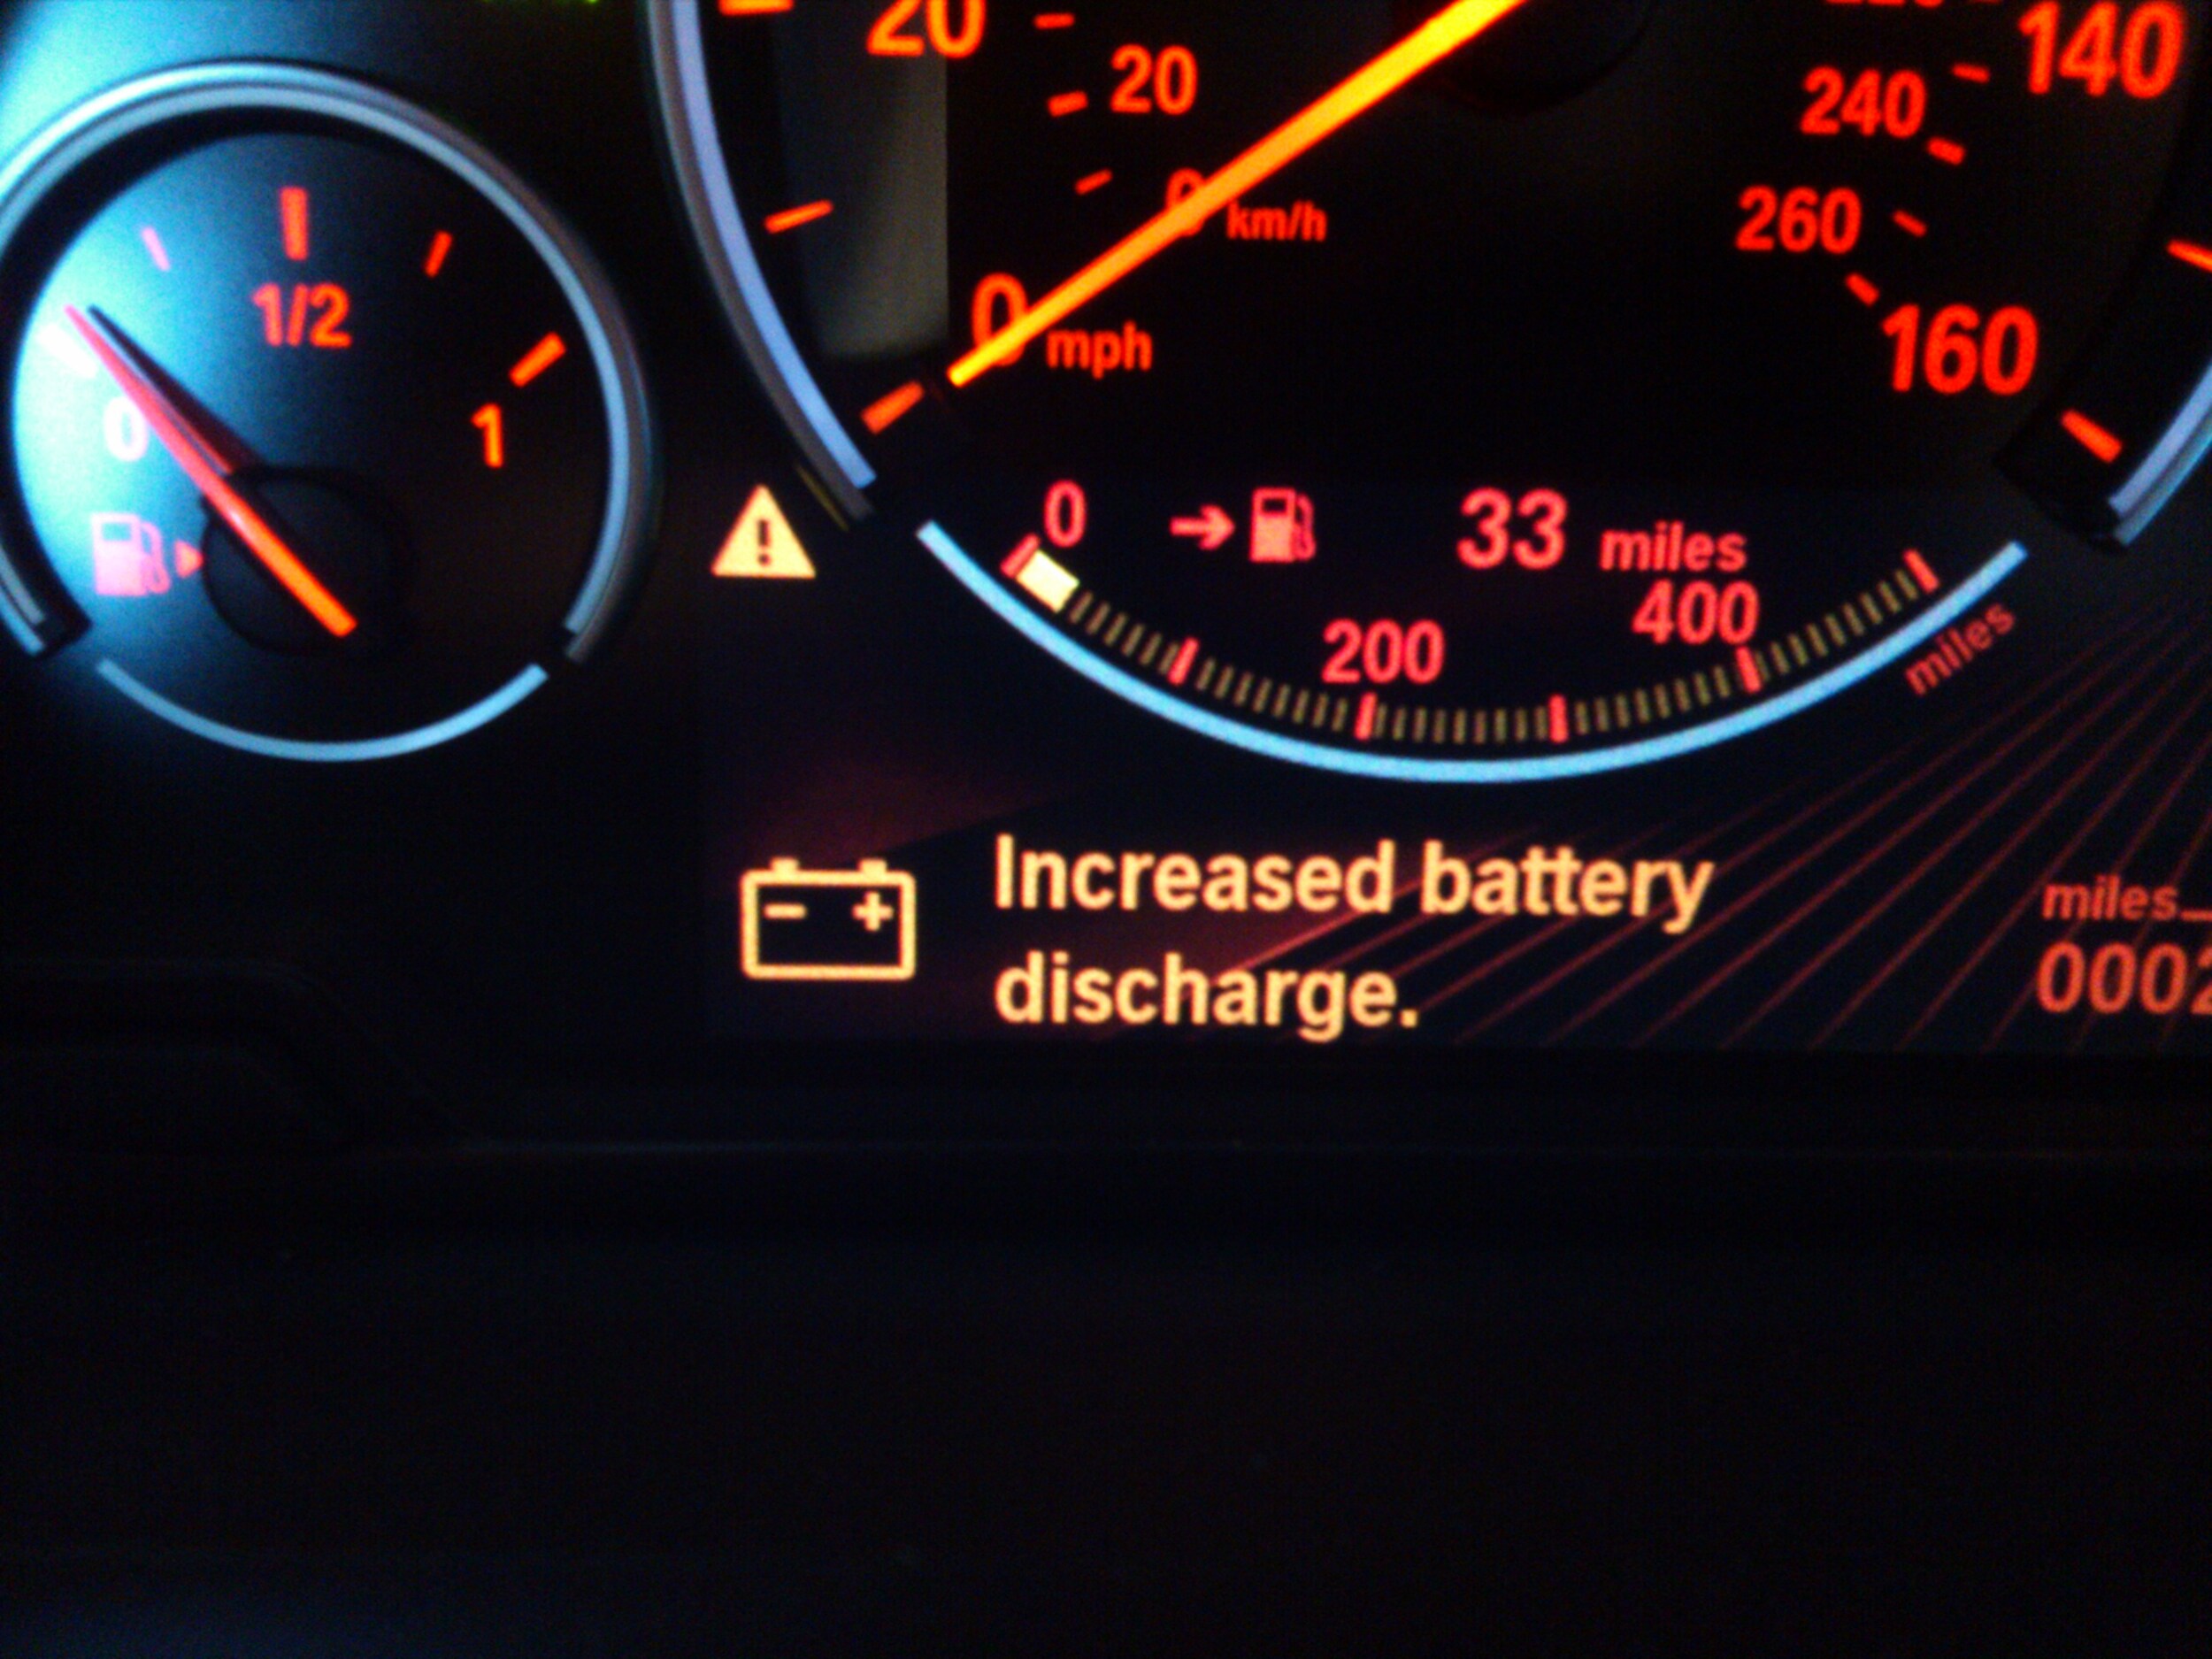 Bmw warning increased battery discharge